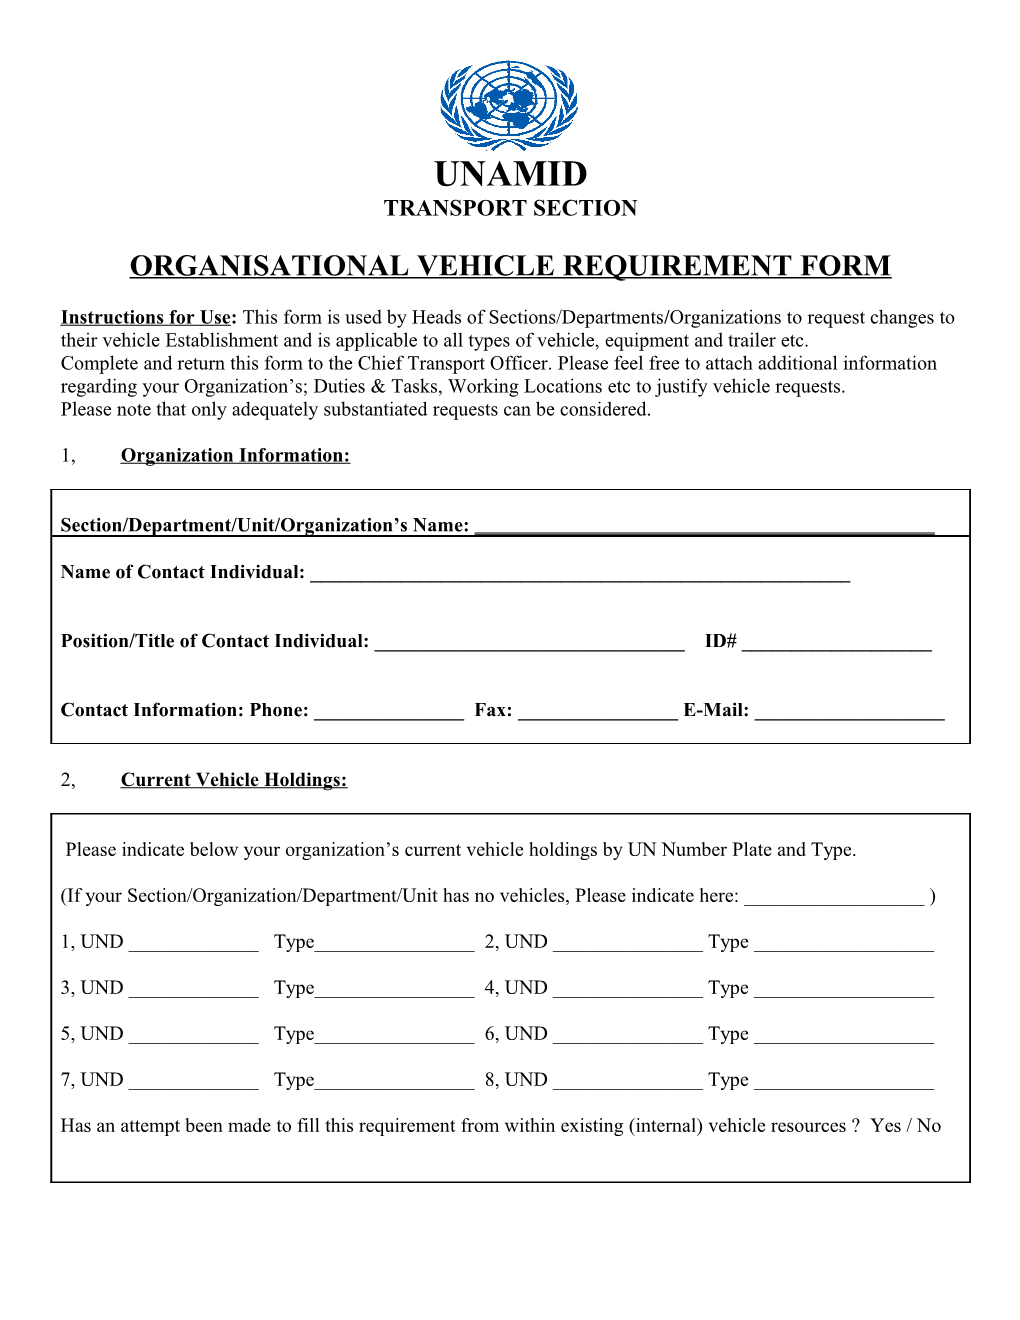 Organisational Vehicle Requirement Form